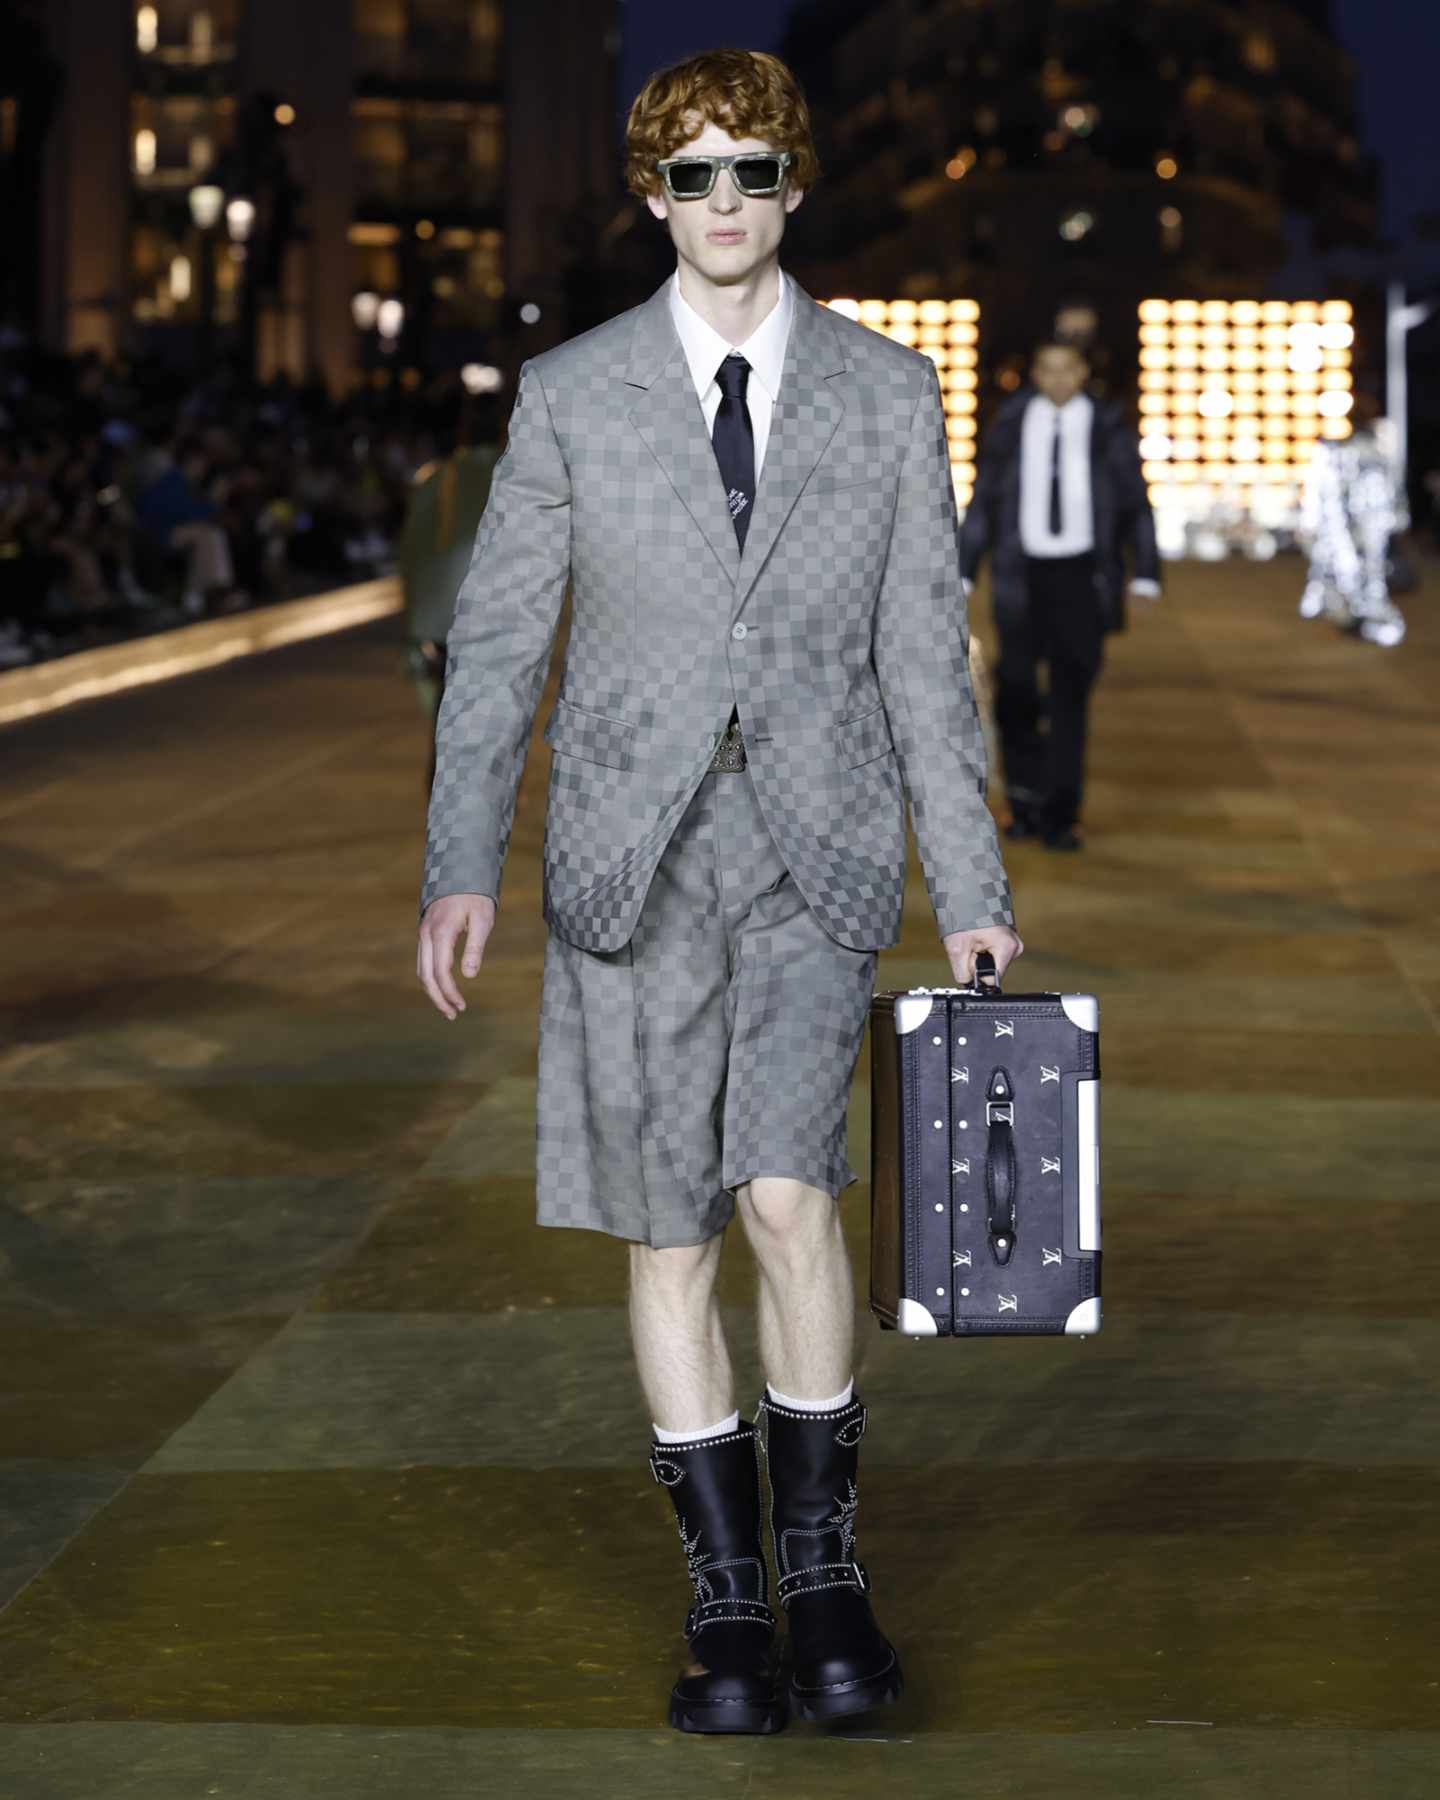 The Louis Vuitton Spring Summer 2022 Collection Casts Its Final Light -  Men's Folio